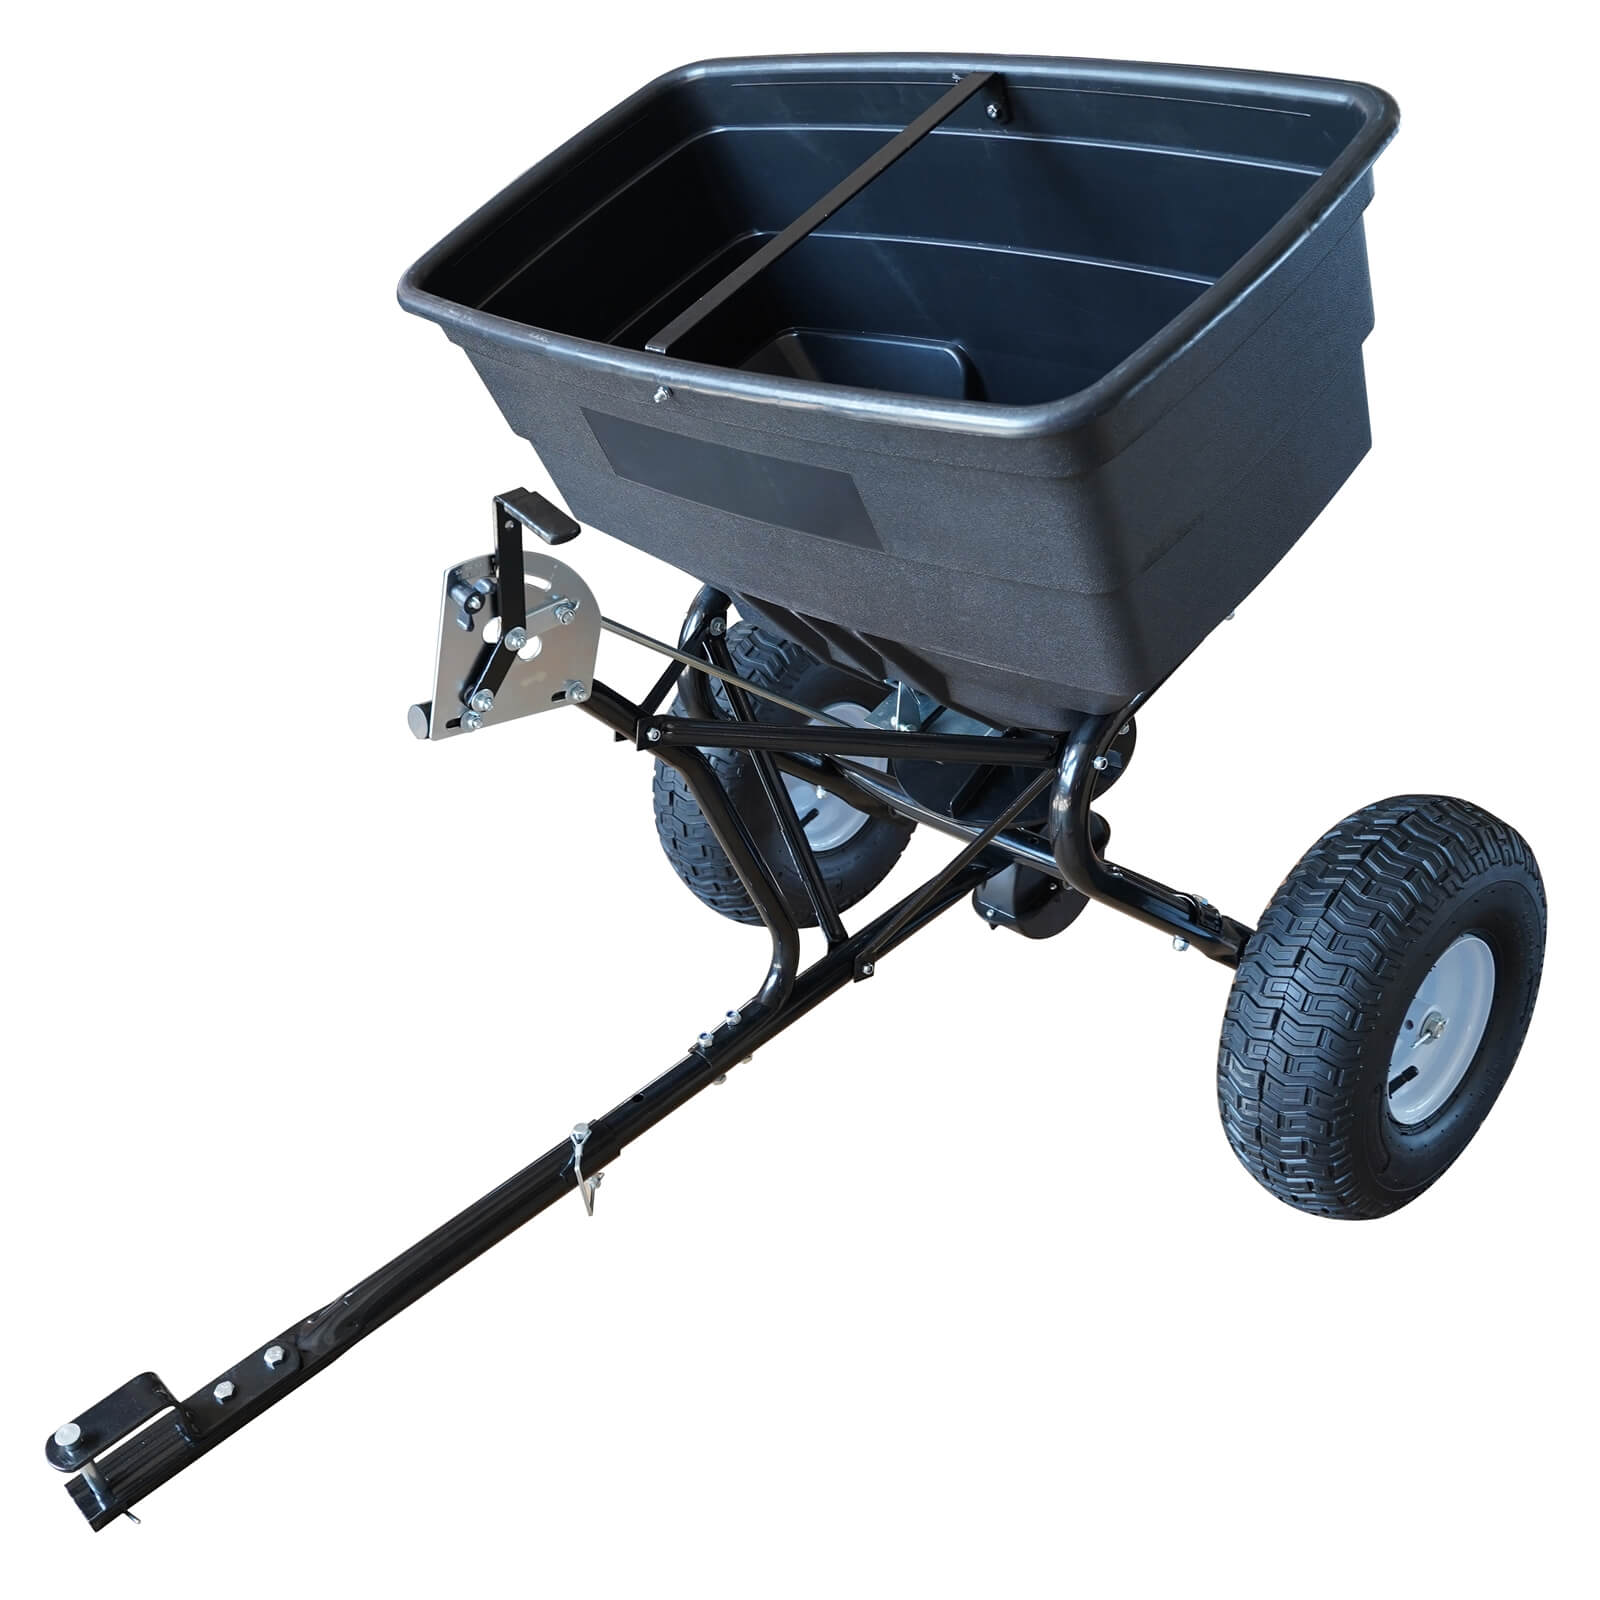 The Handy Towed Broadcast Spreader